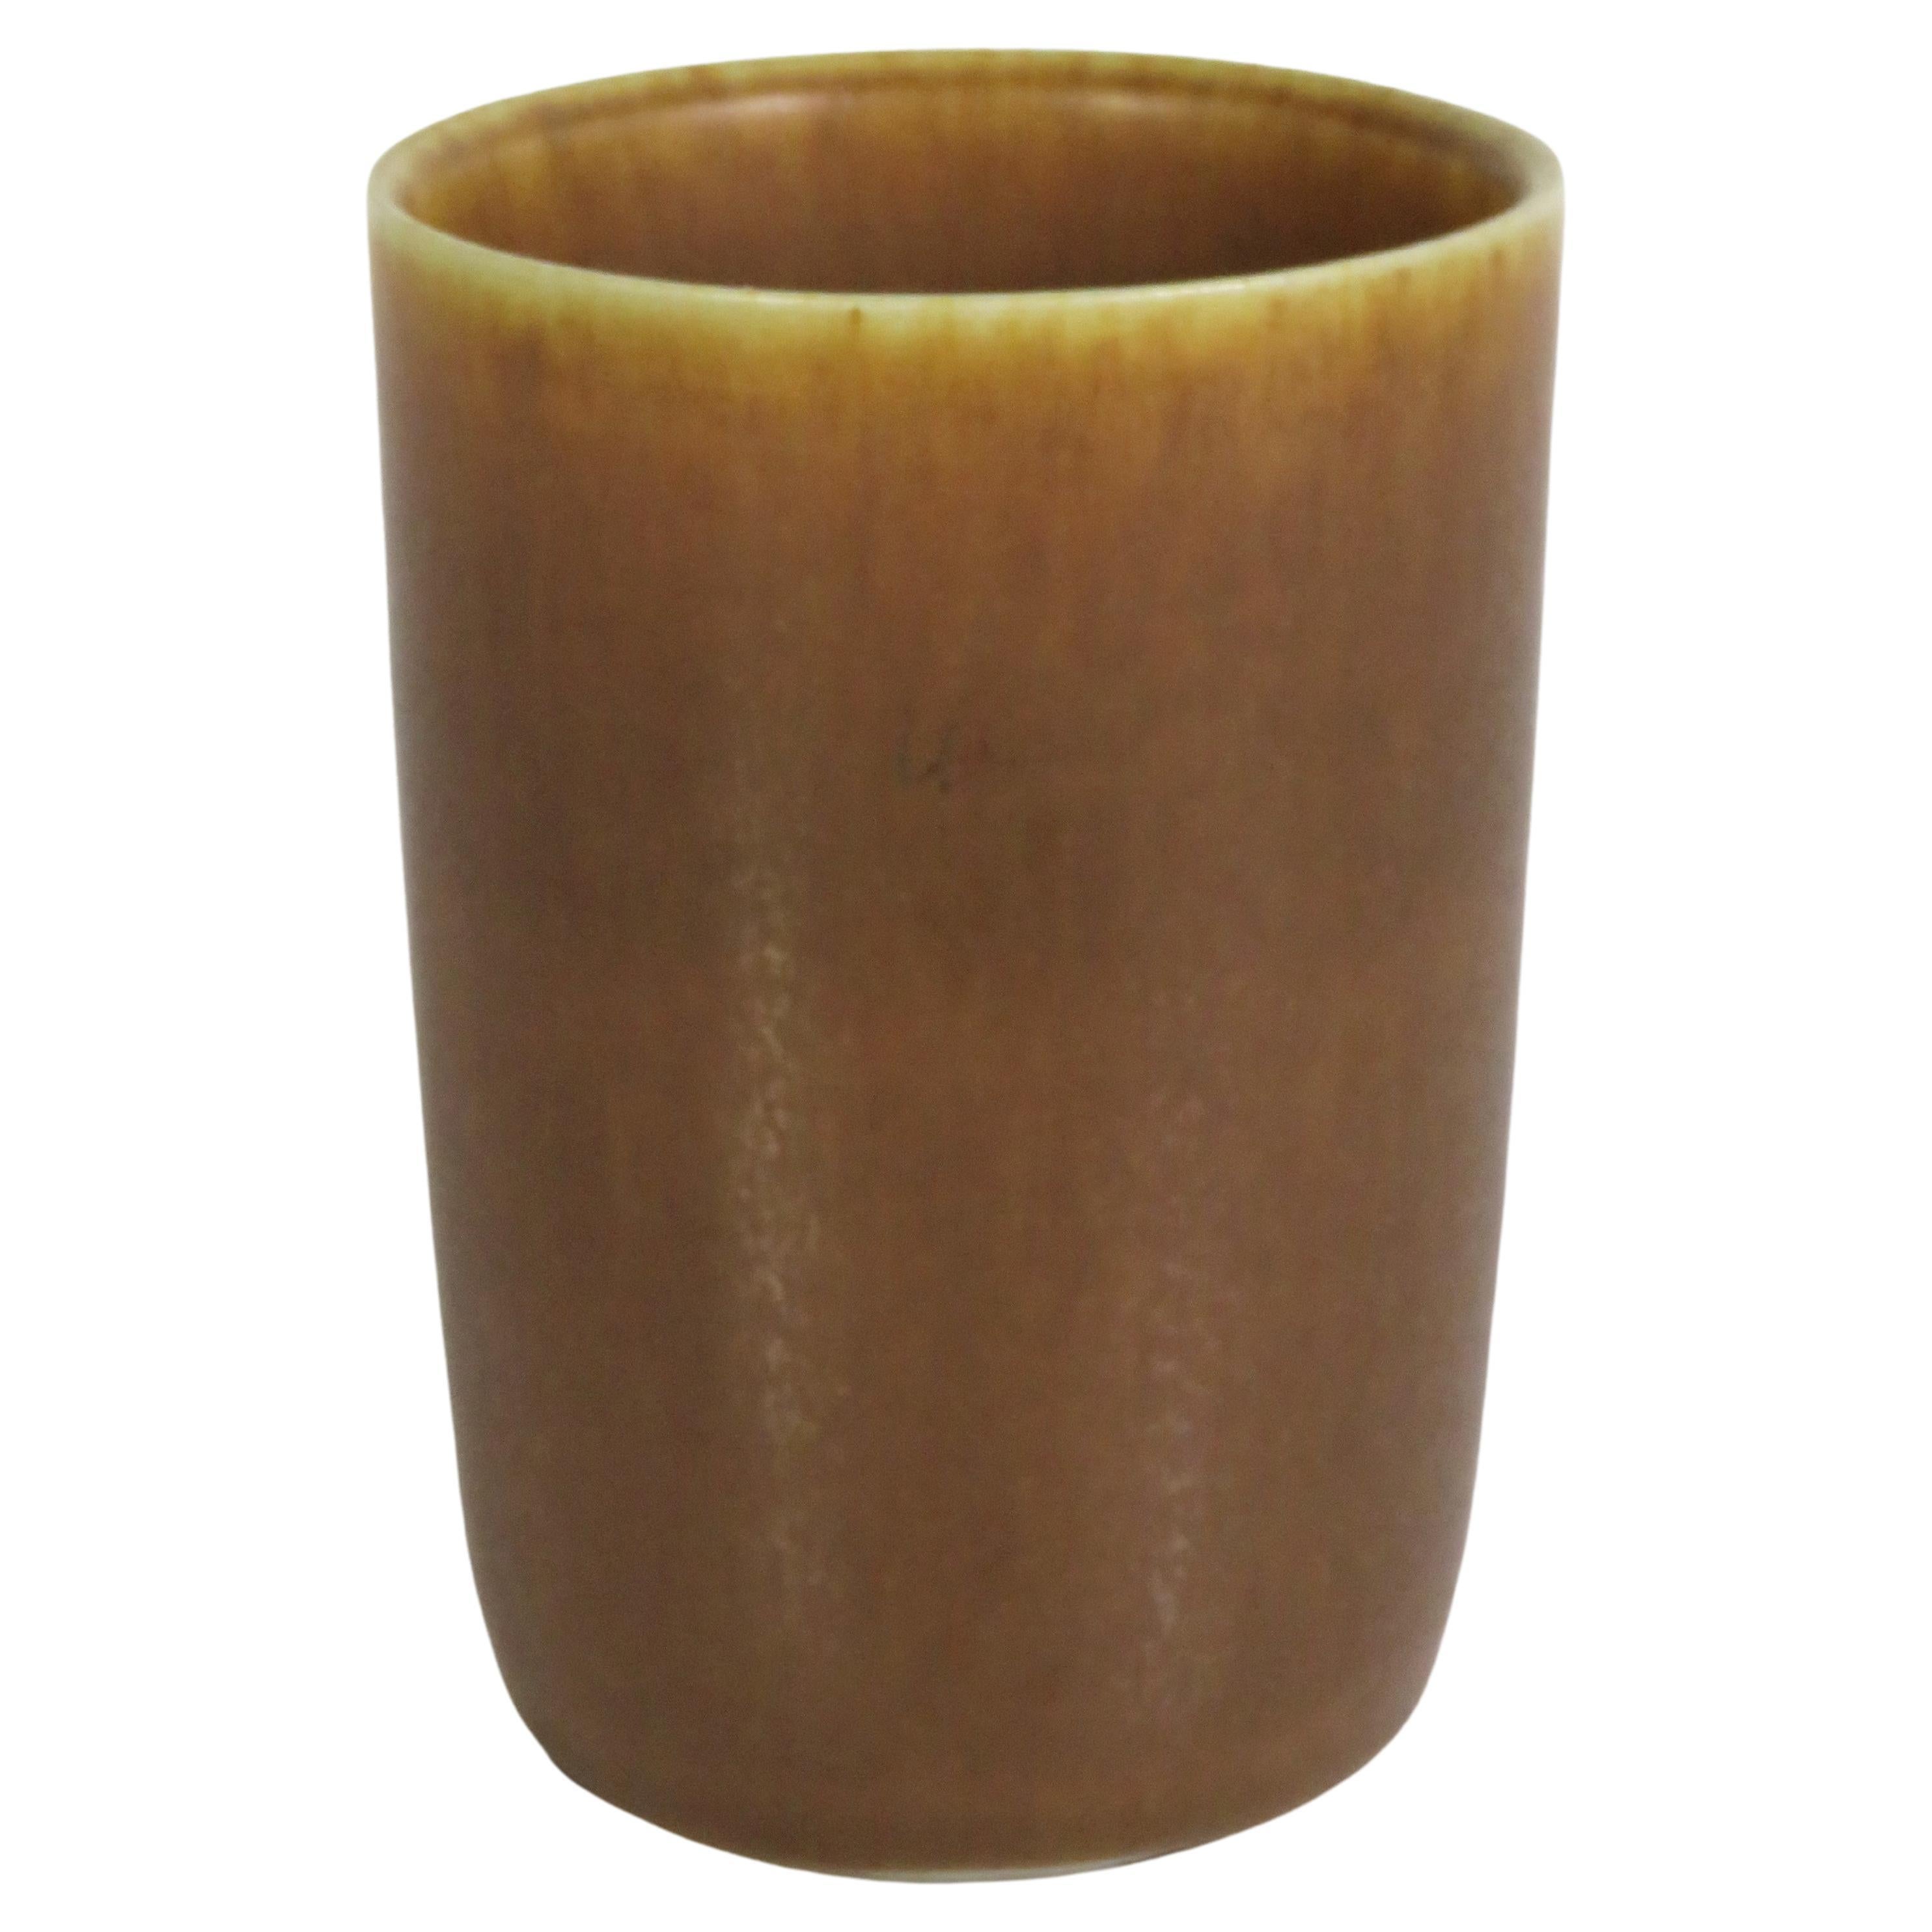 Scandinavian Mid-Century Modern Danish hand thrown pottery vase by Per and Annelise Linnemann-Schmidt for Palshus from the 1960s. Lovely simple shape with a soft smooth feel of the mottled tan glaze over a cream colored body. Incised on bottom